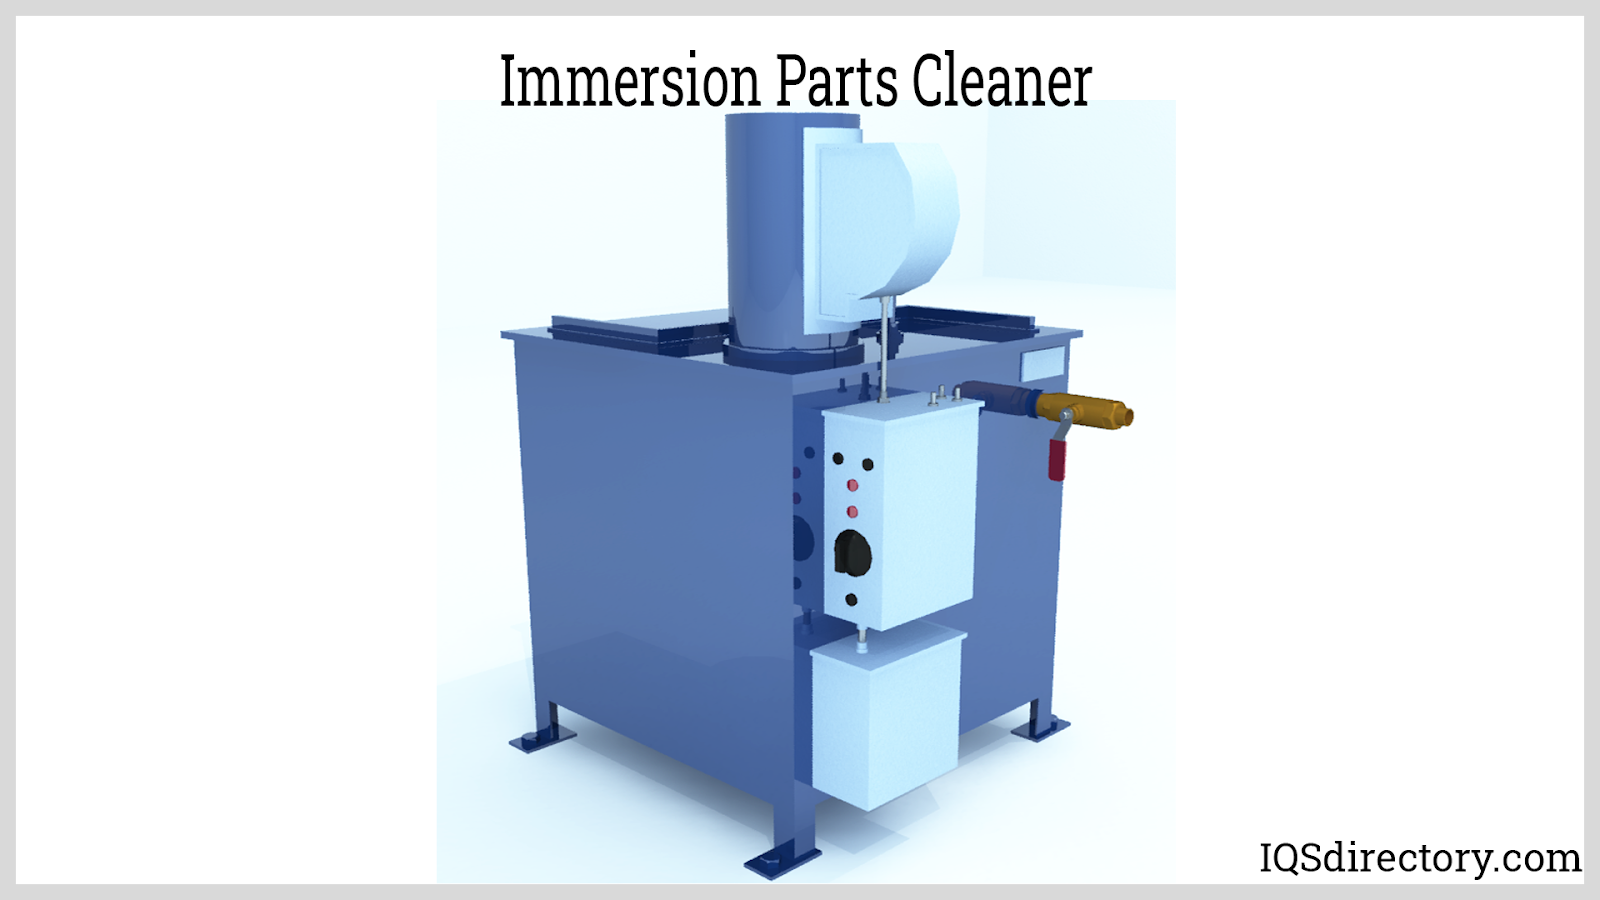 Immersion Parts Cleaner